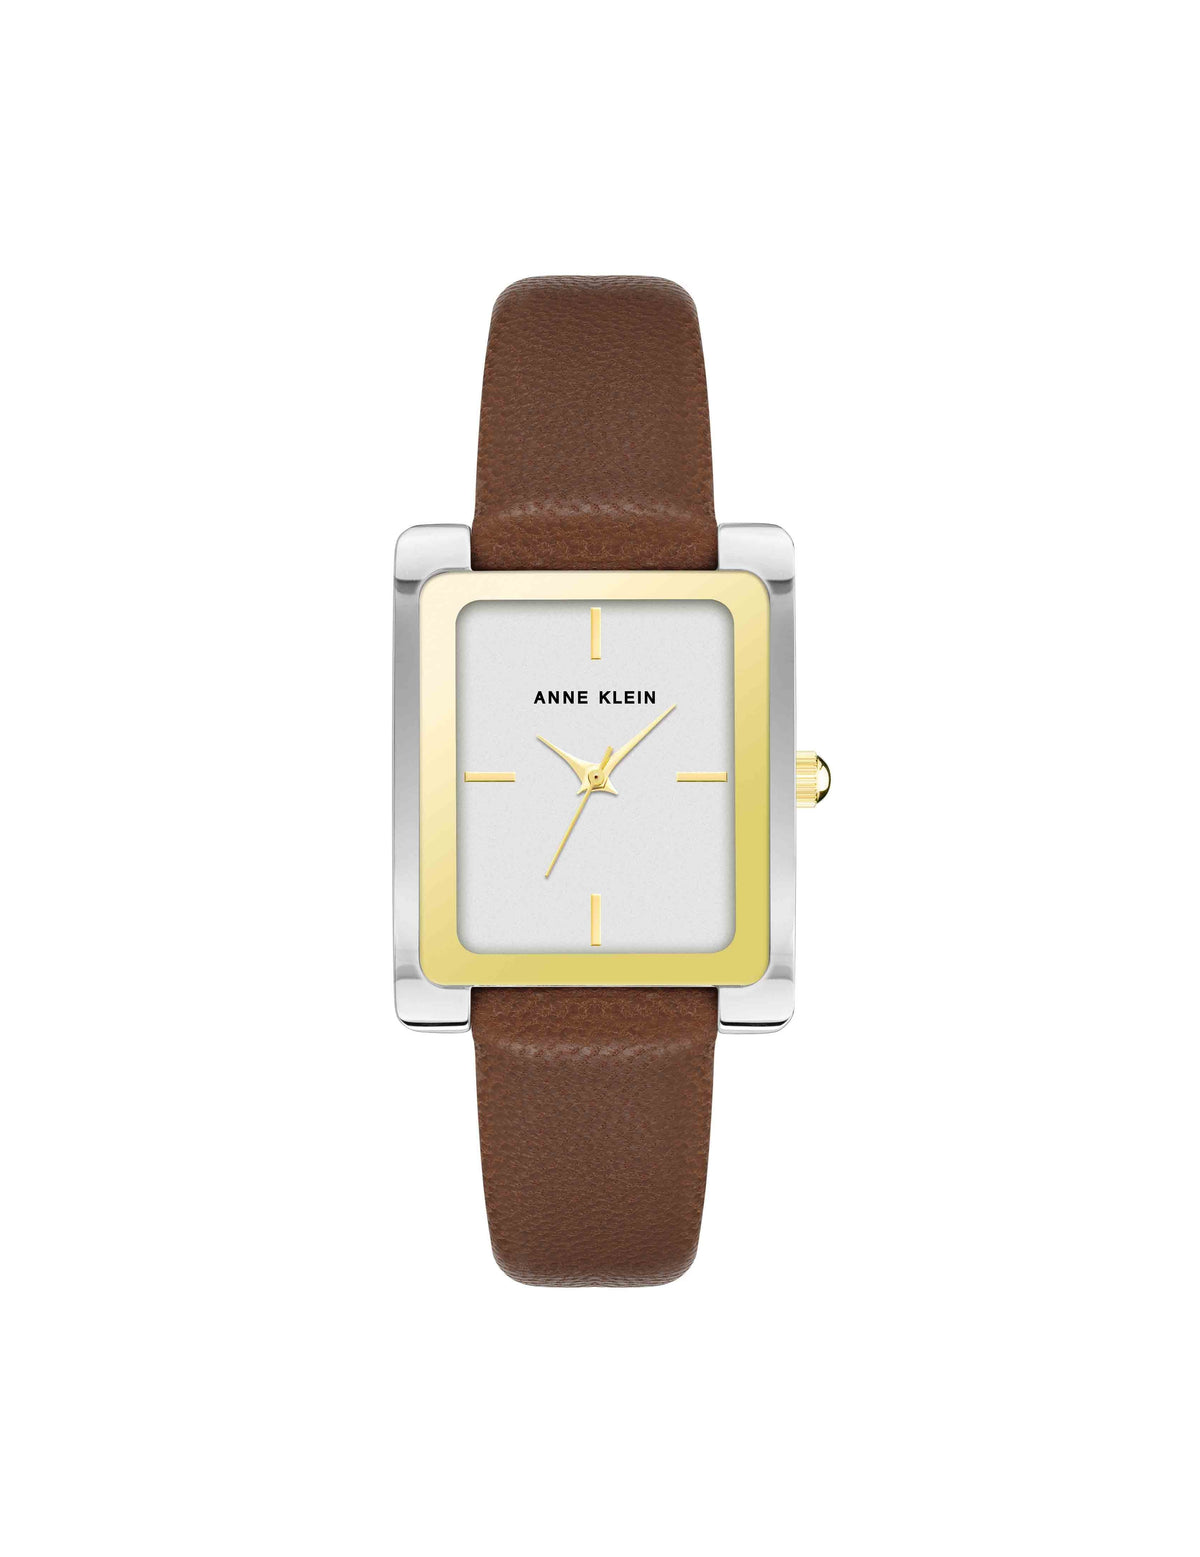 Anne Klein Brown/ Two-Tone Rectangular Case Leather Band Watch